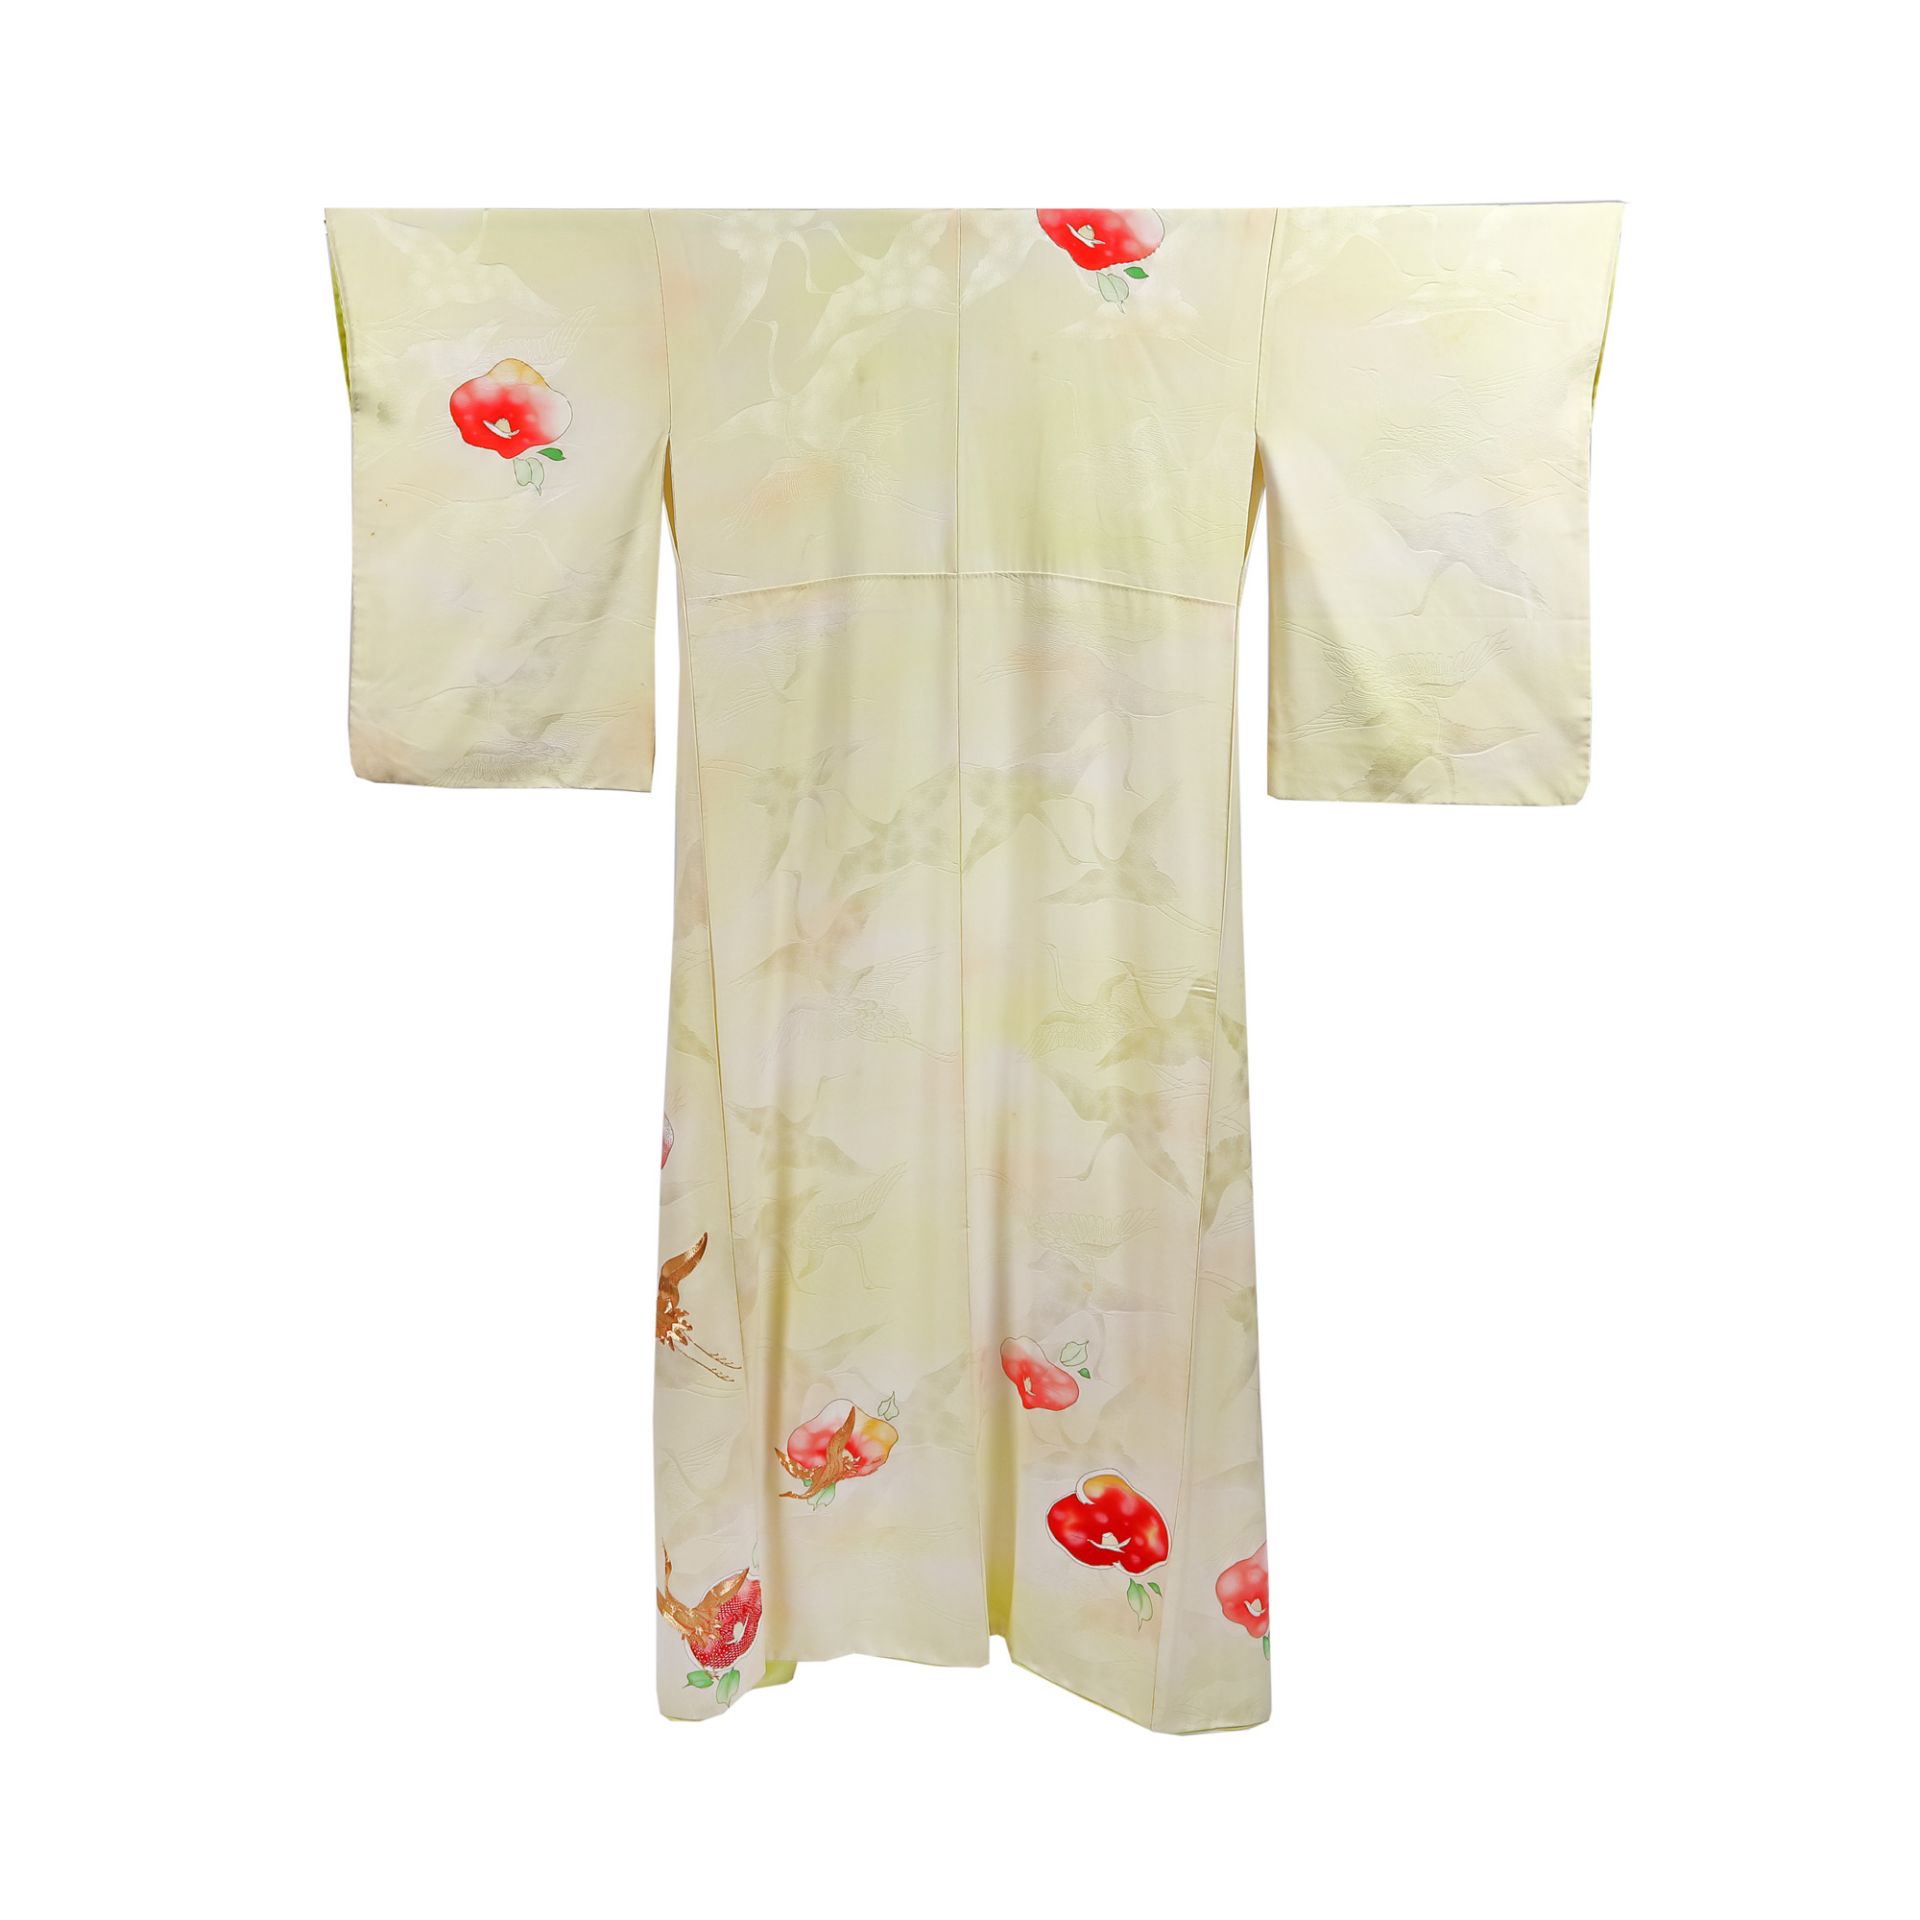 Furisode (ceremonial kimono) made of silk, embellished with painted camellias and golden thread embr - Image 3 of 3